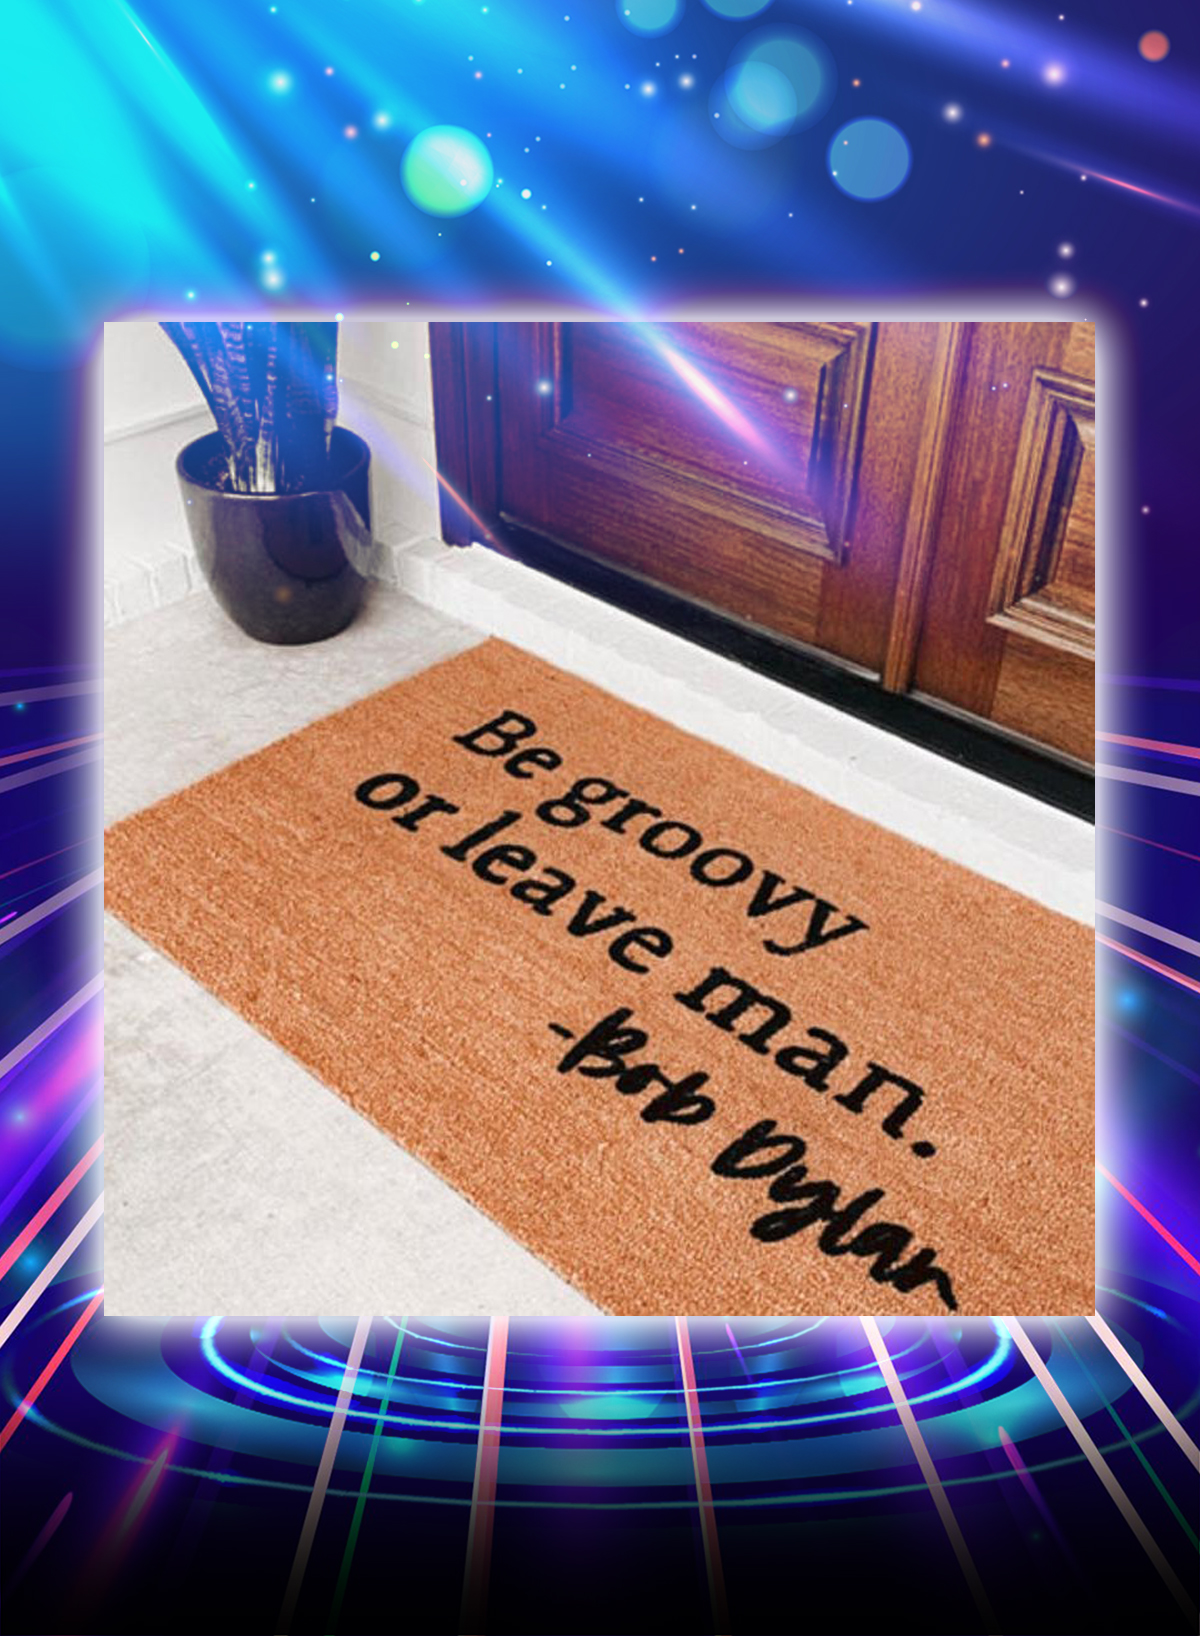 Be groovy or leave man Bob Dylan doormat - Picture 1